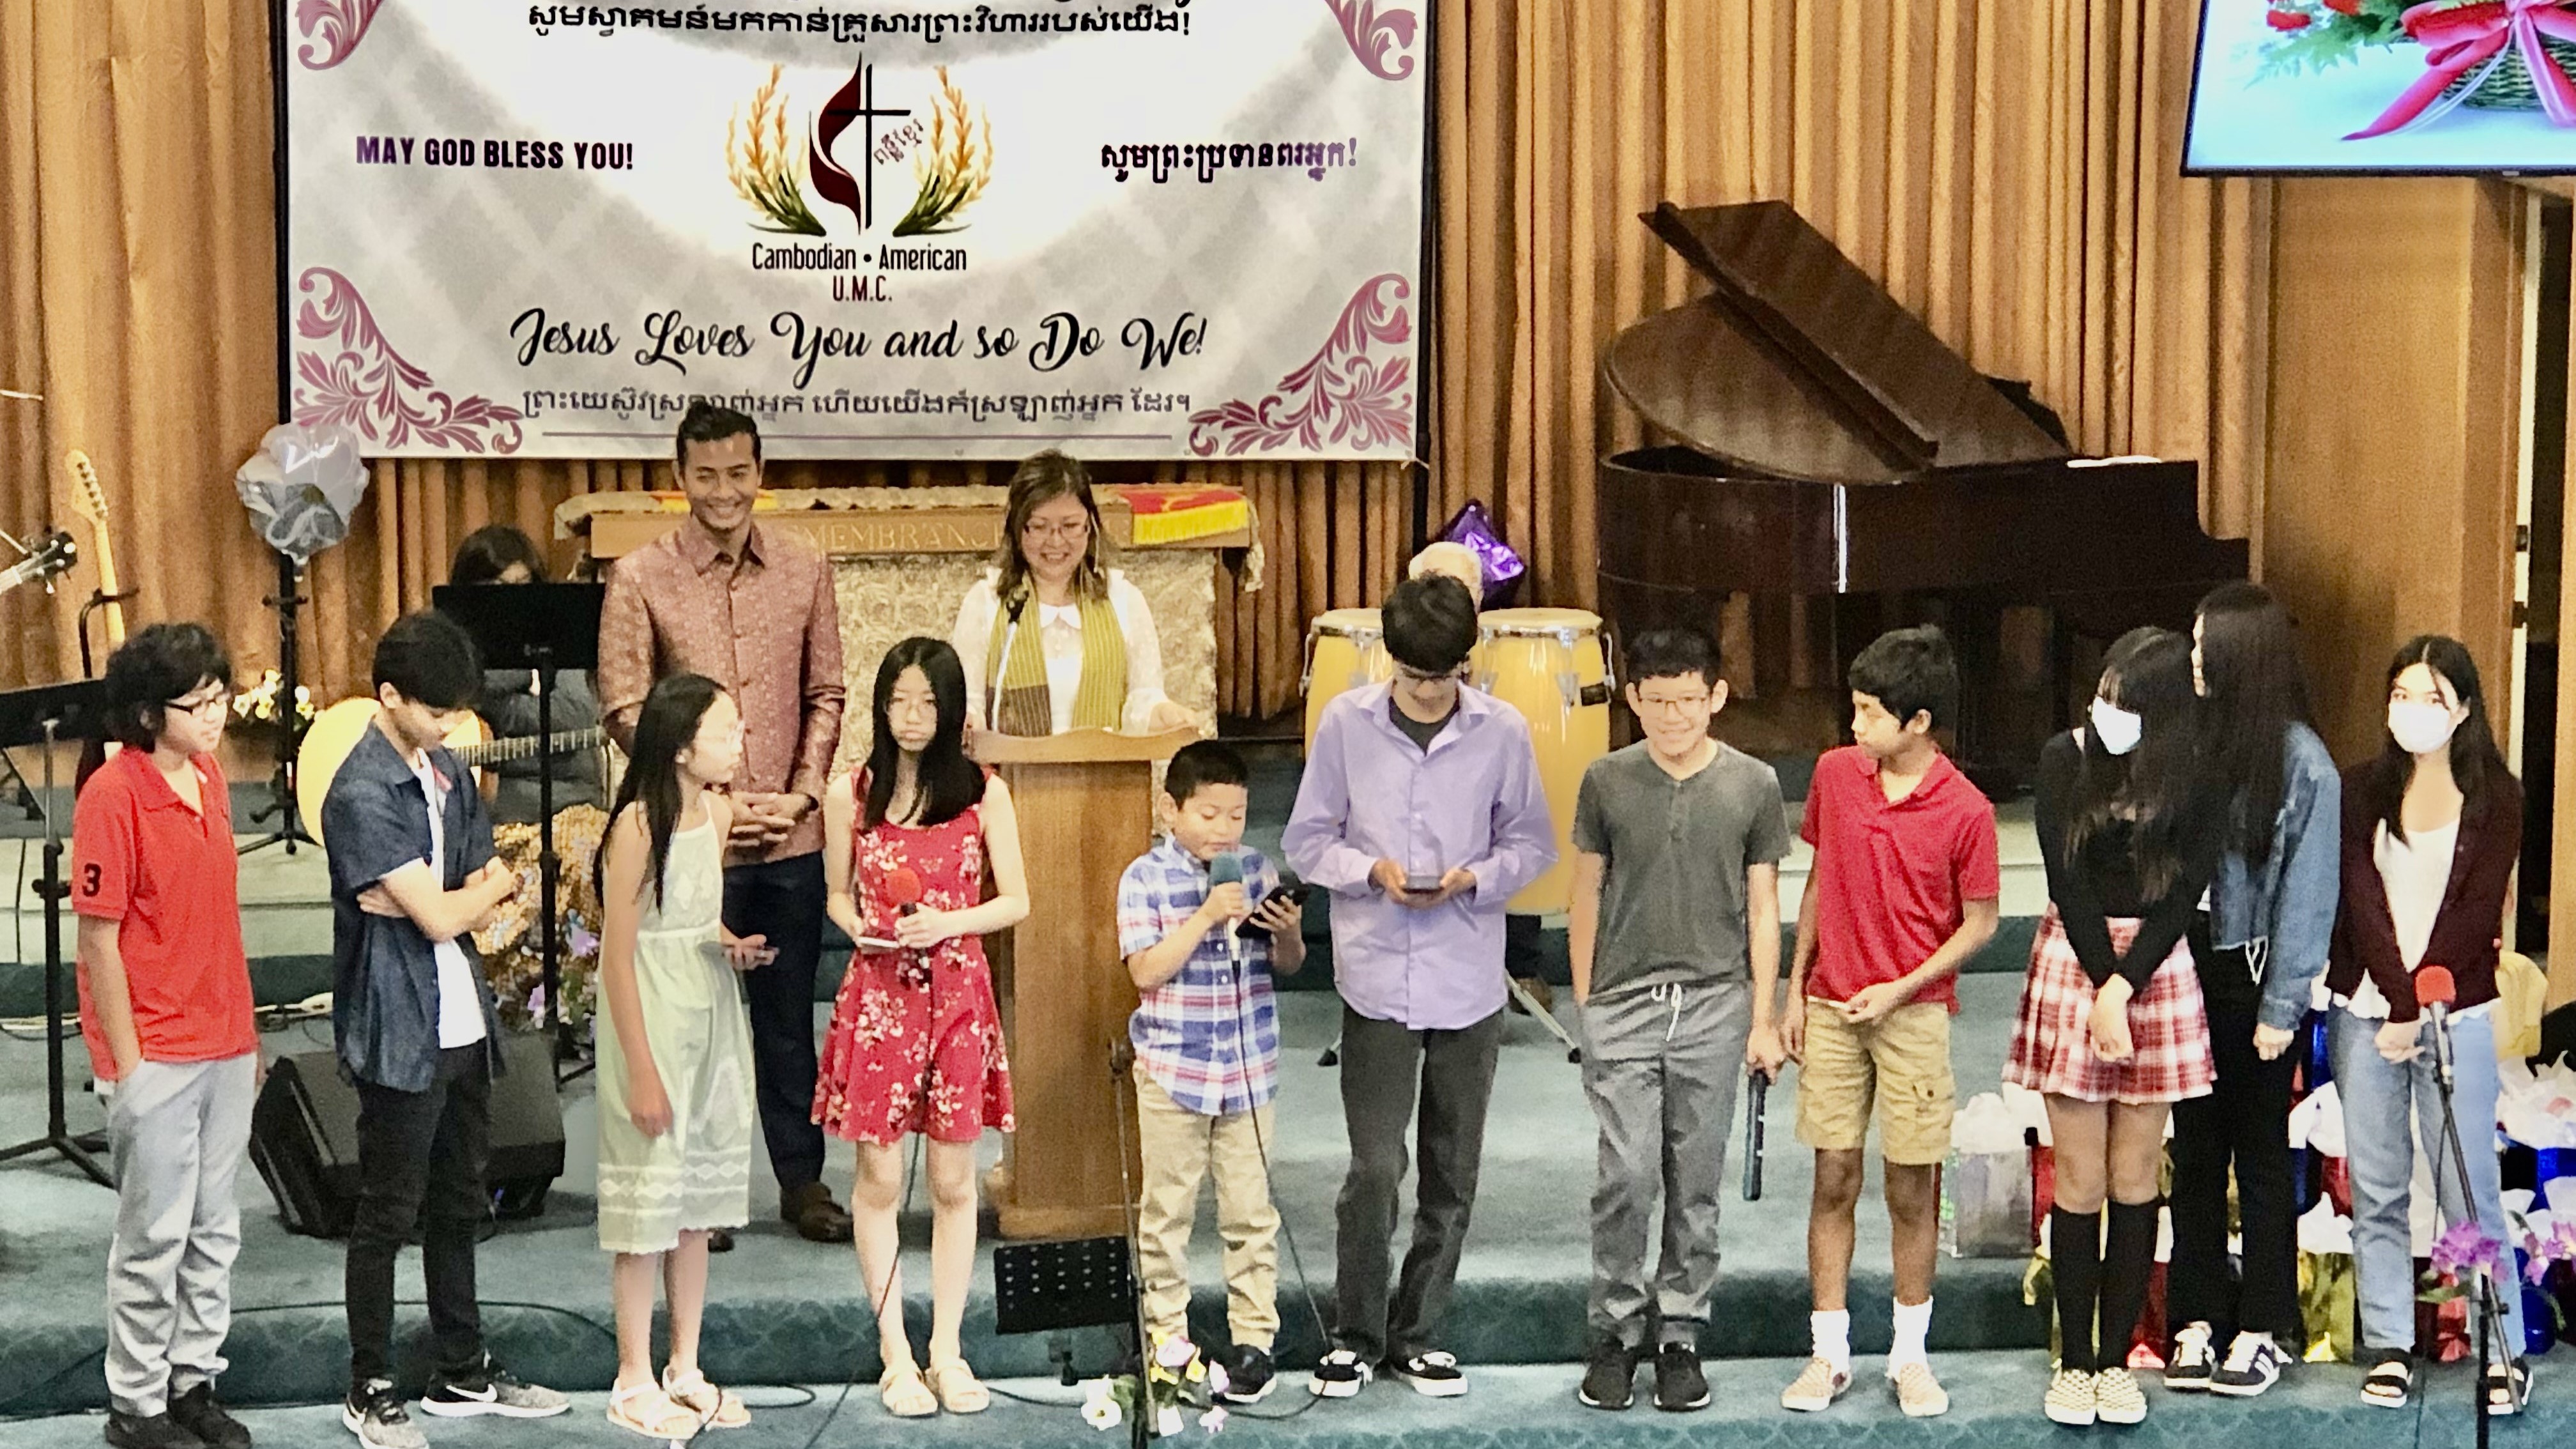 Dr. Lee (center podium) hopes that Long Beach Cambodian American UMC is the destination for everyone visiting the area. Photo courtesy of Dr. Lee. 